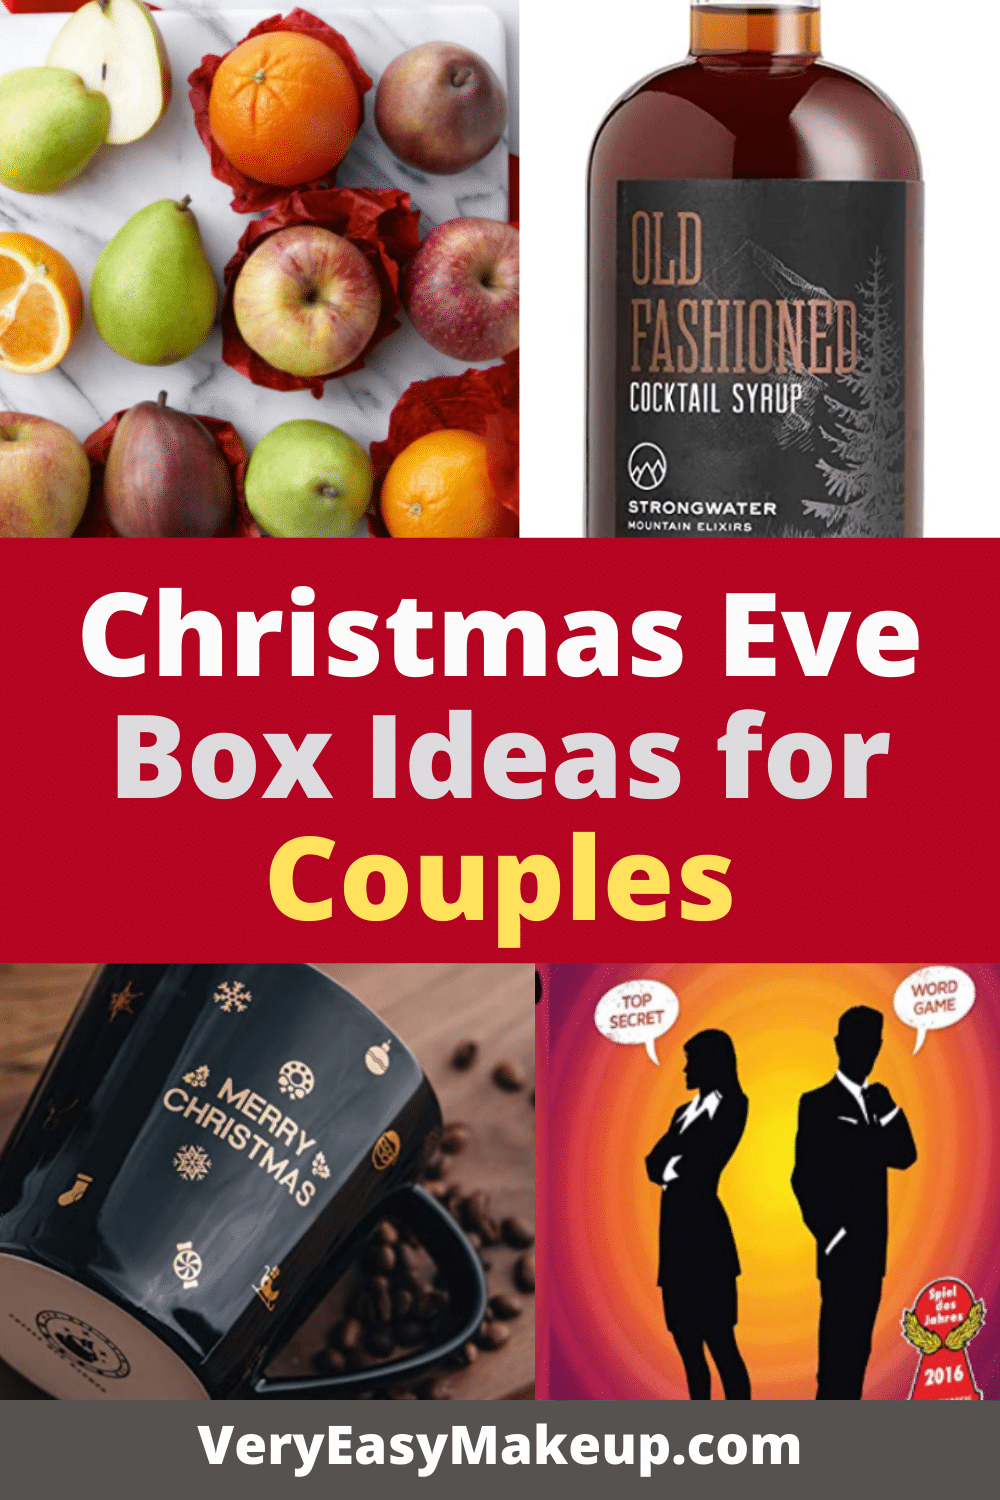 Easy Christmas Eve Box Ideas for Couples by Very Easy Makeup